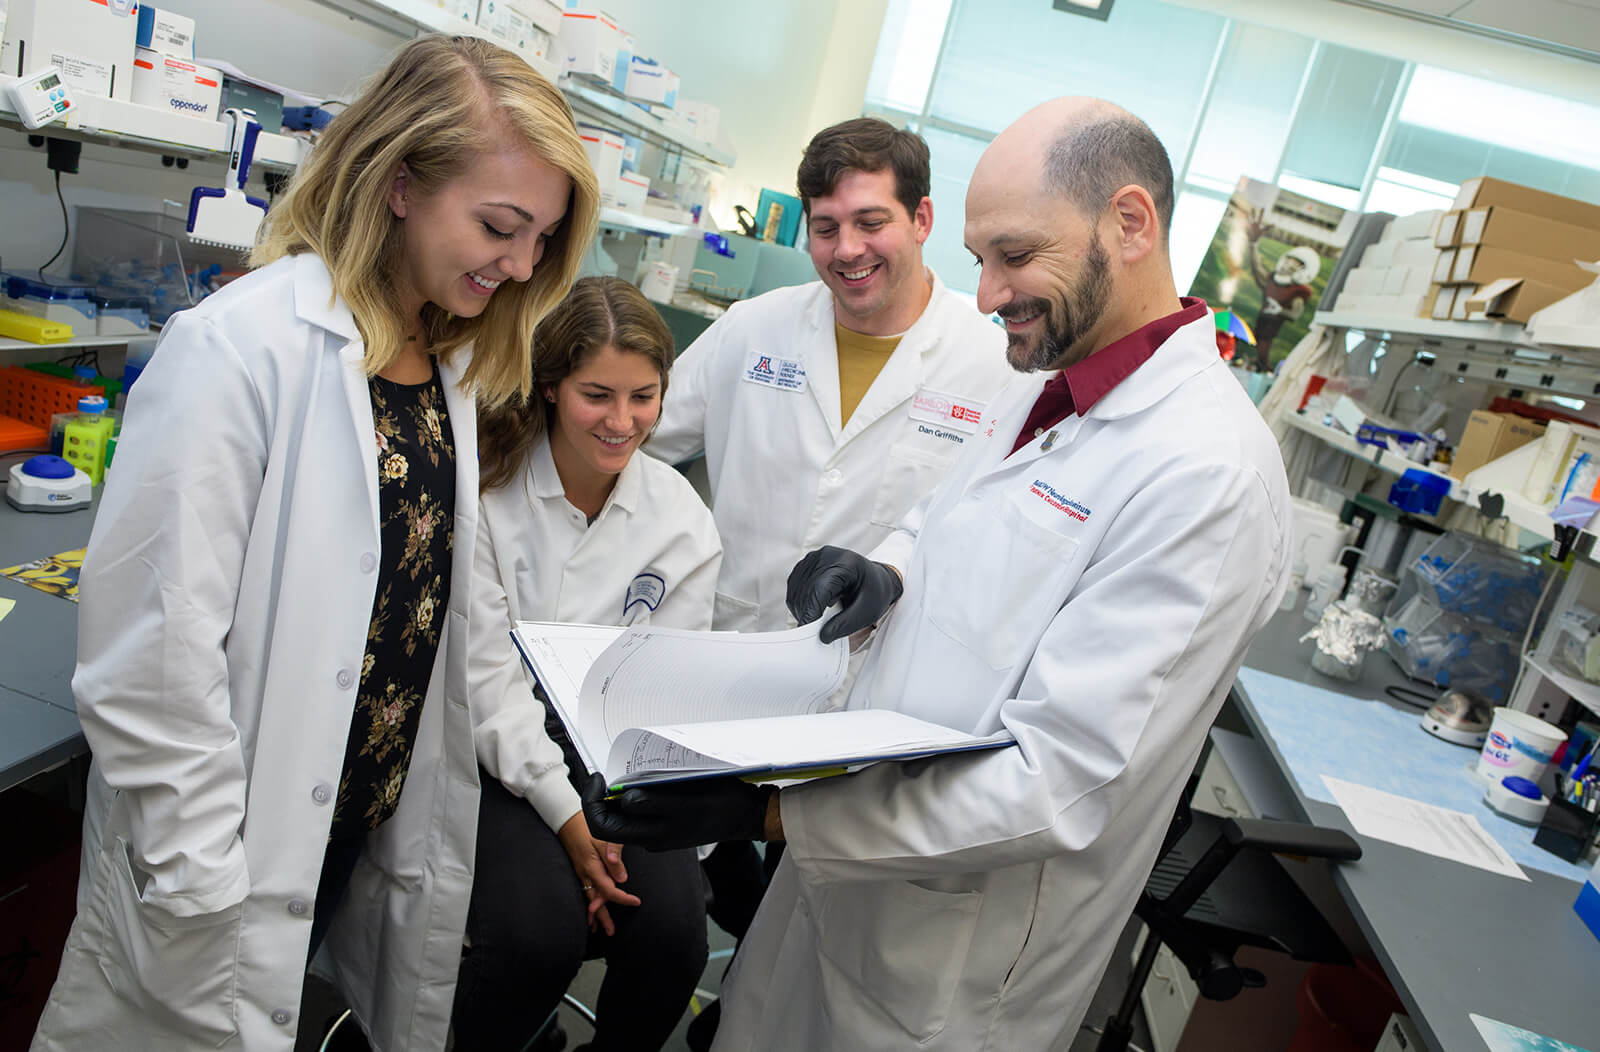 Katherine Giordano (Far Left) in the Lab with Dr. Jonathan Lifshitz (Far Right) and Others